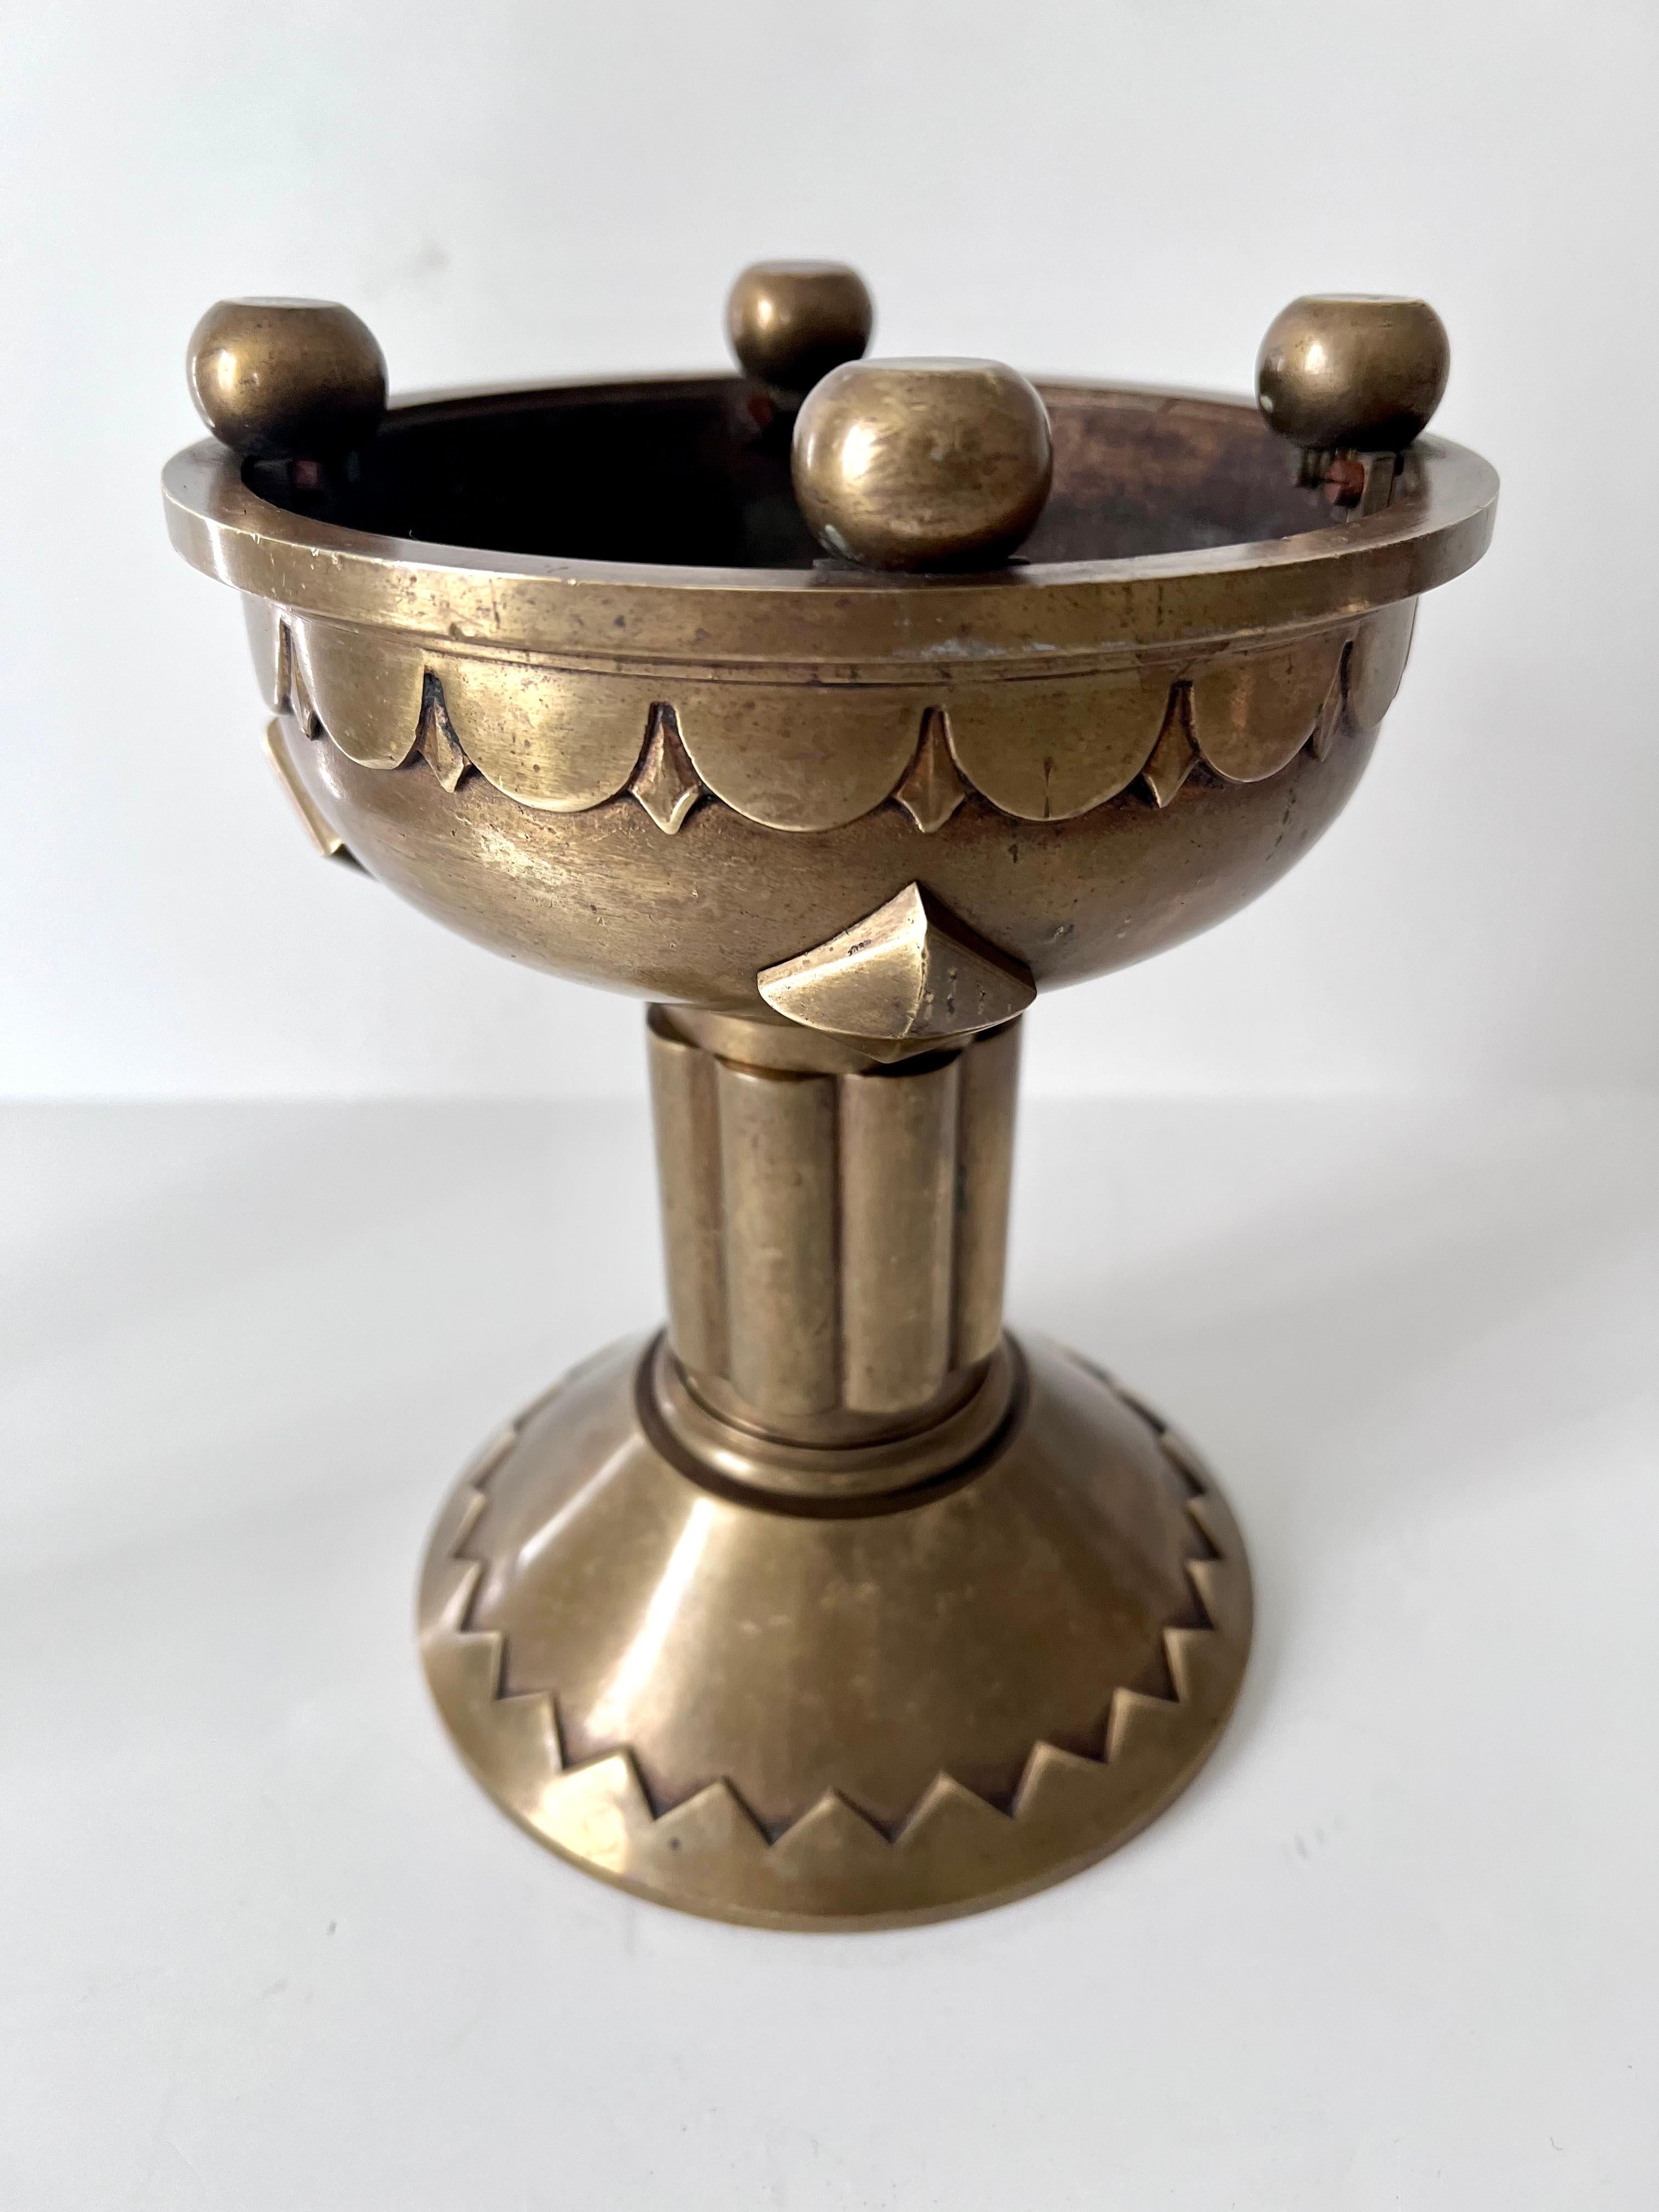 Acquired in Paris France, an architectural element that is solid brass. The piece is very detailed and architectural. A wonderful paperweight or decorative object standing alone... also could hold office supplies, or fruits, and would be a terrific